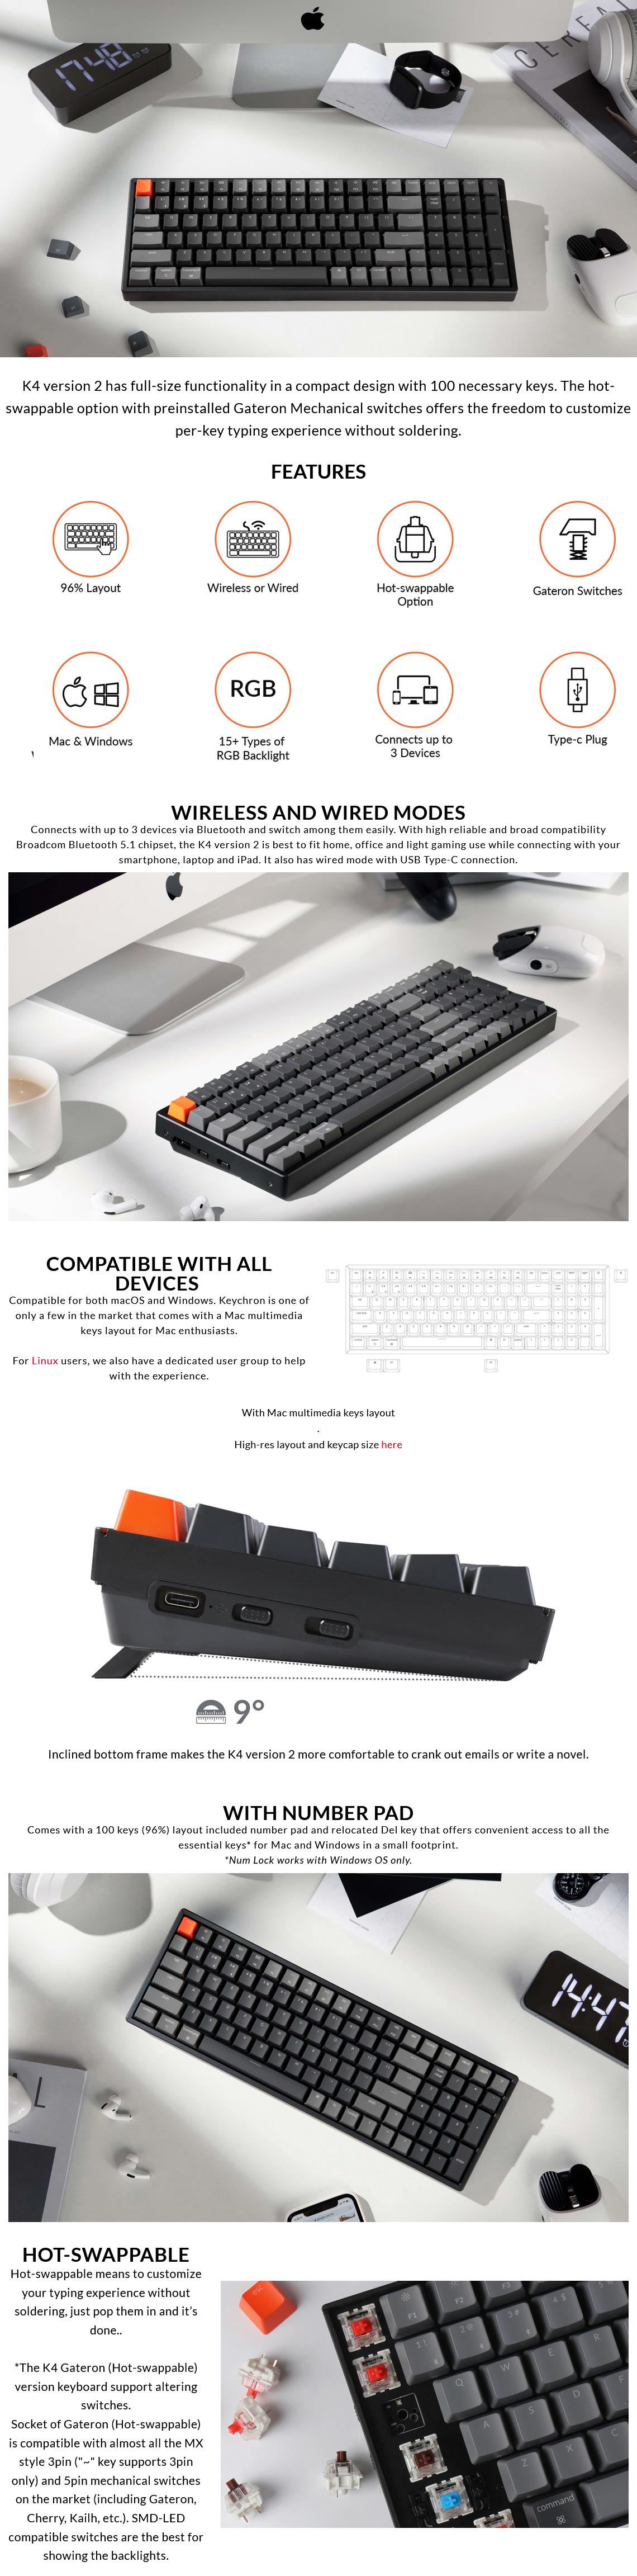 A large marketing image providing additional information about the product Keychron K4v2 Compact RGB Hot-Swappable Mechanical Keyboard for Mac & Windows (Brown Switch) - Additional alt info not provided